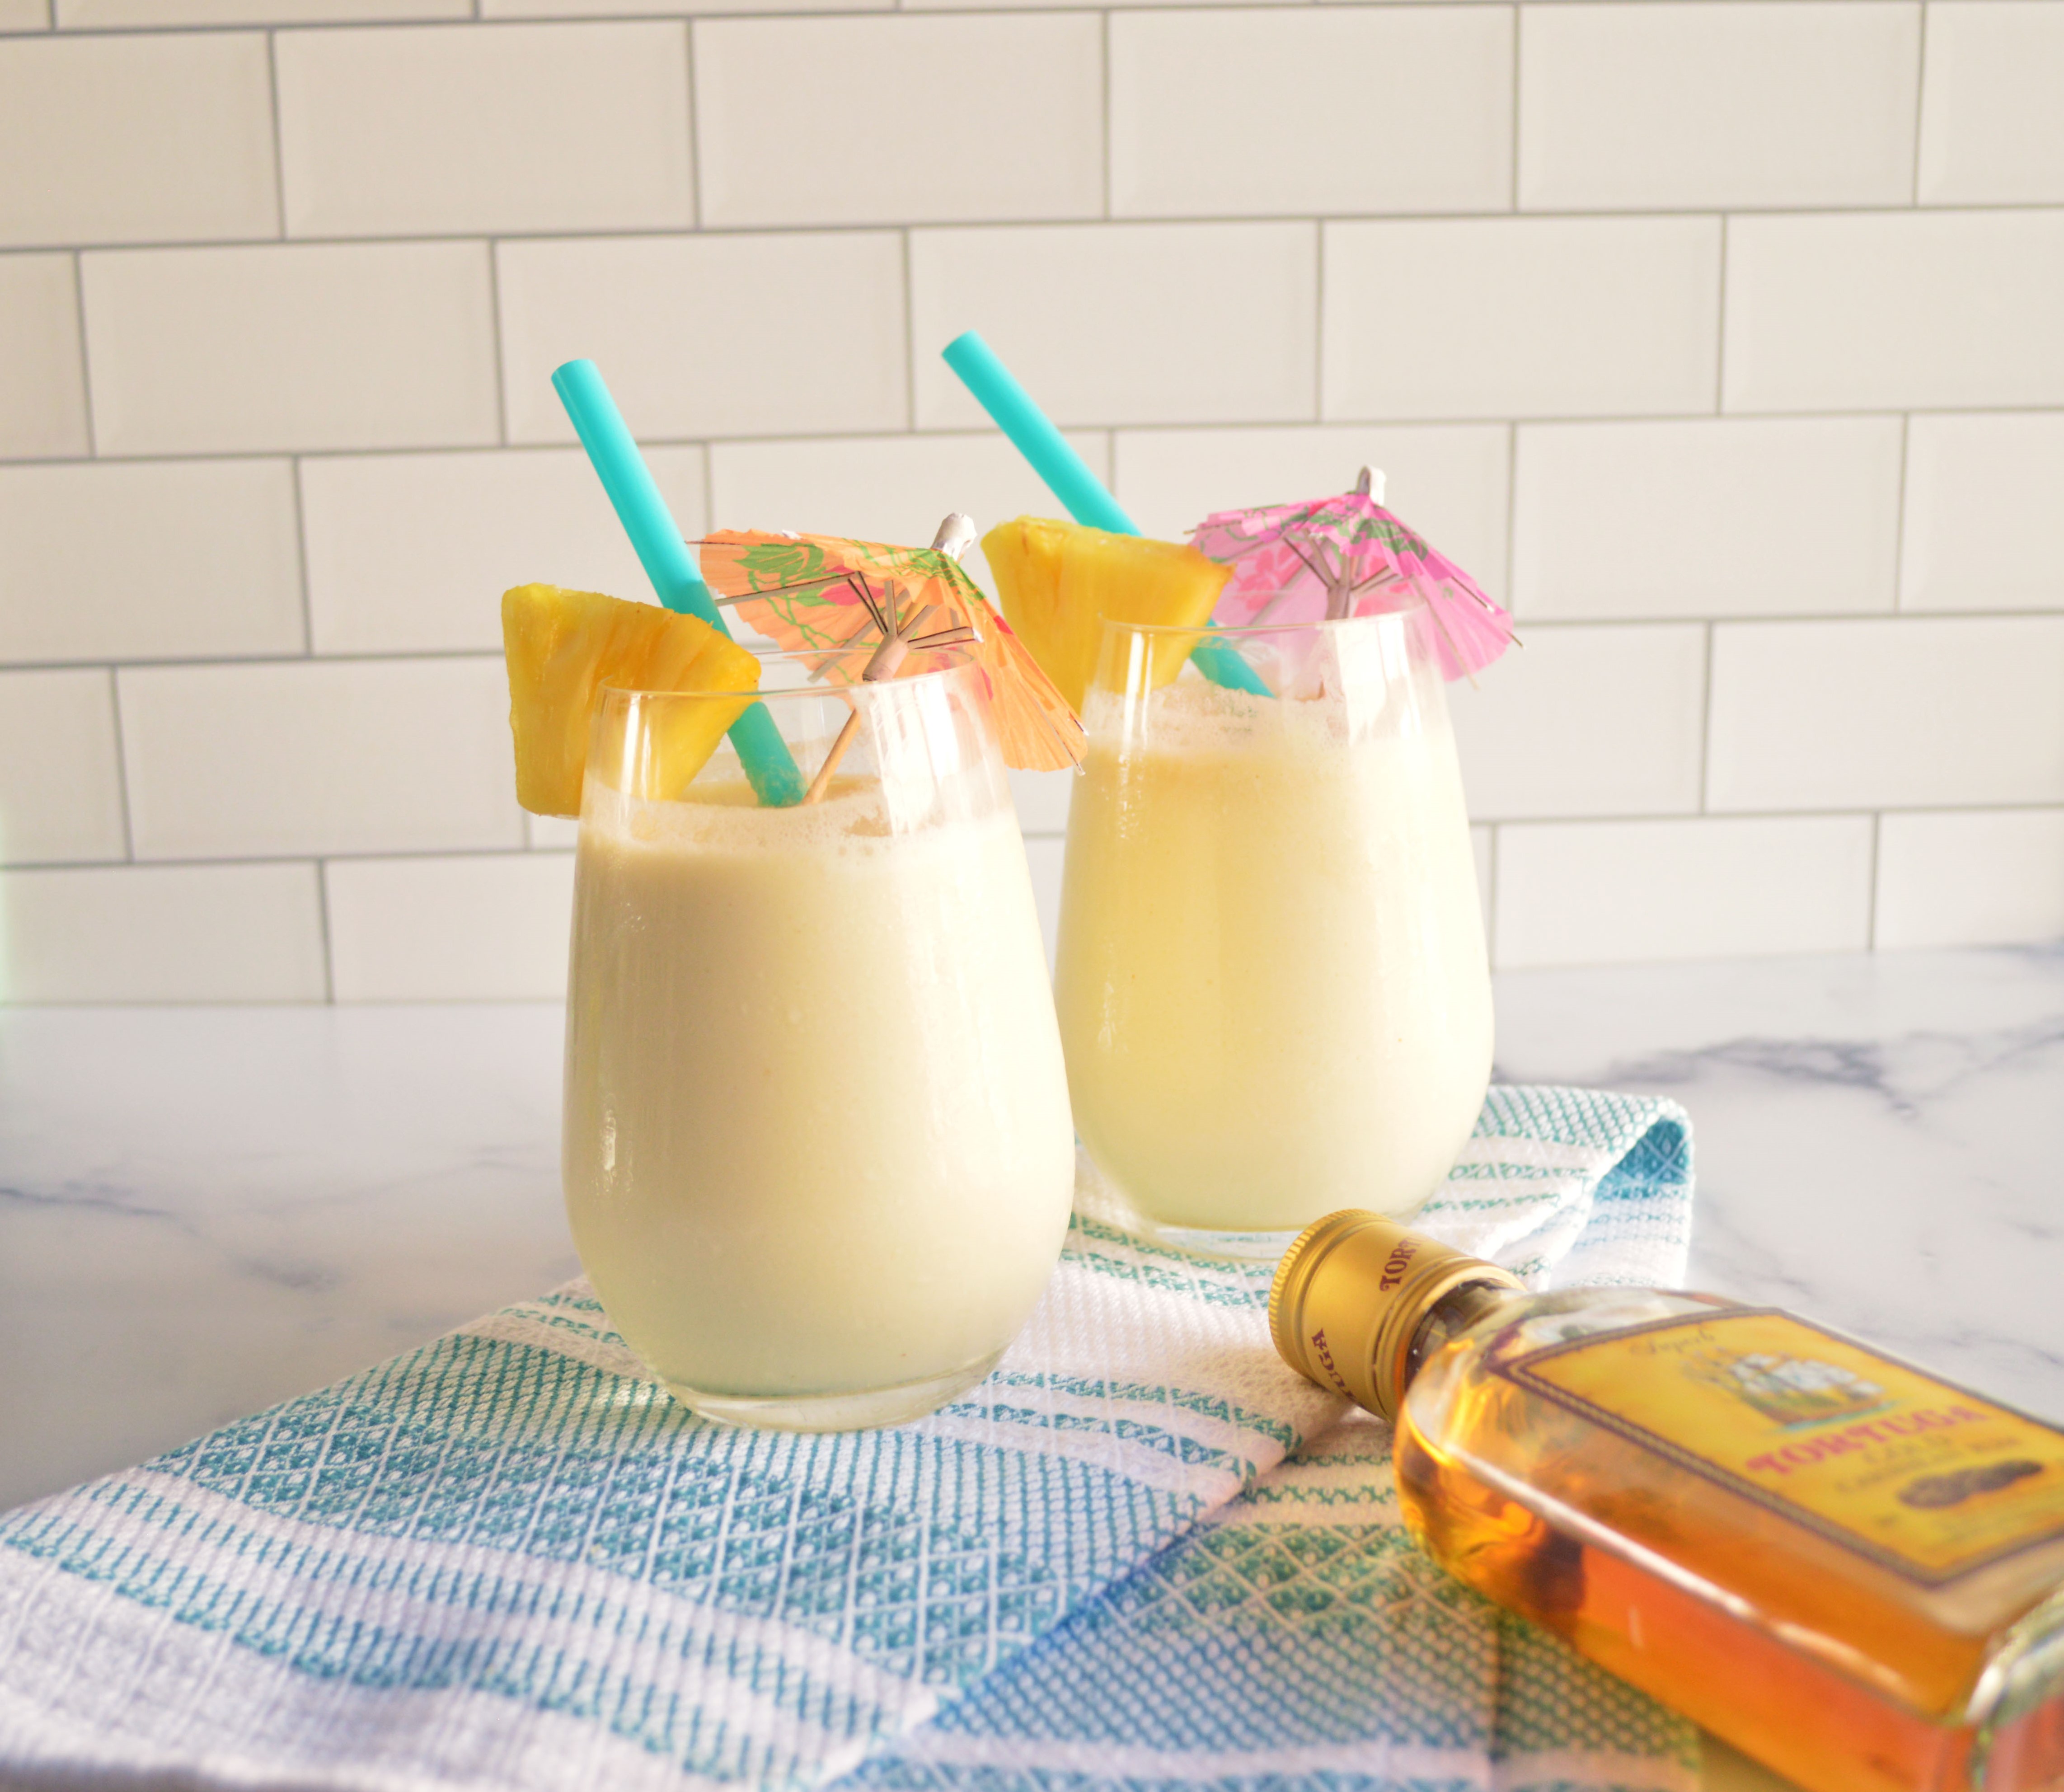 Two Piña Coladas sitting on a white and blue dish cloth like a towel at the beach with a bottle of Tortuga rum in the foreground 